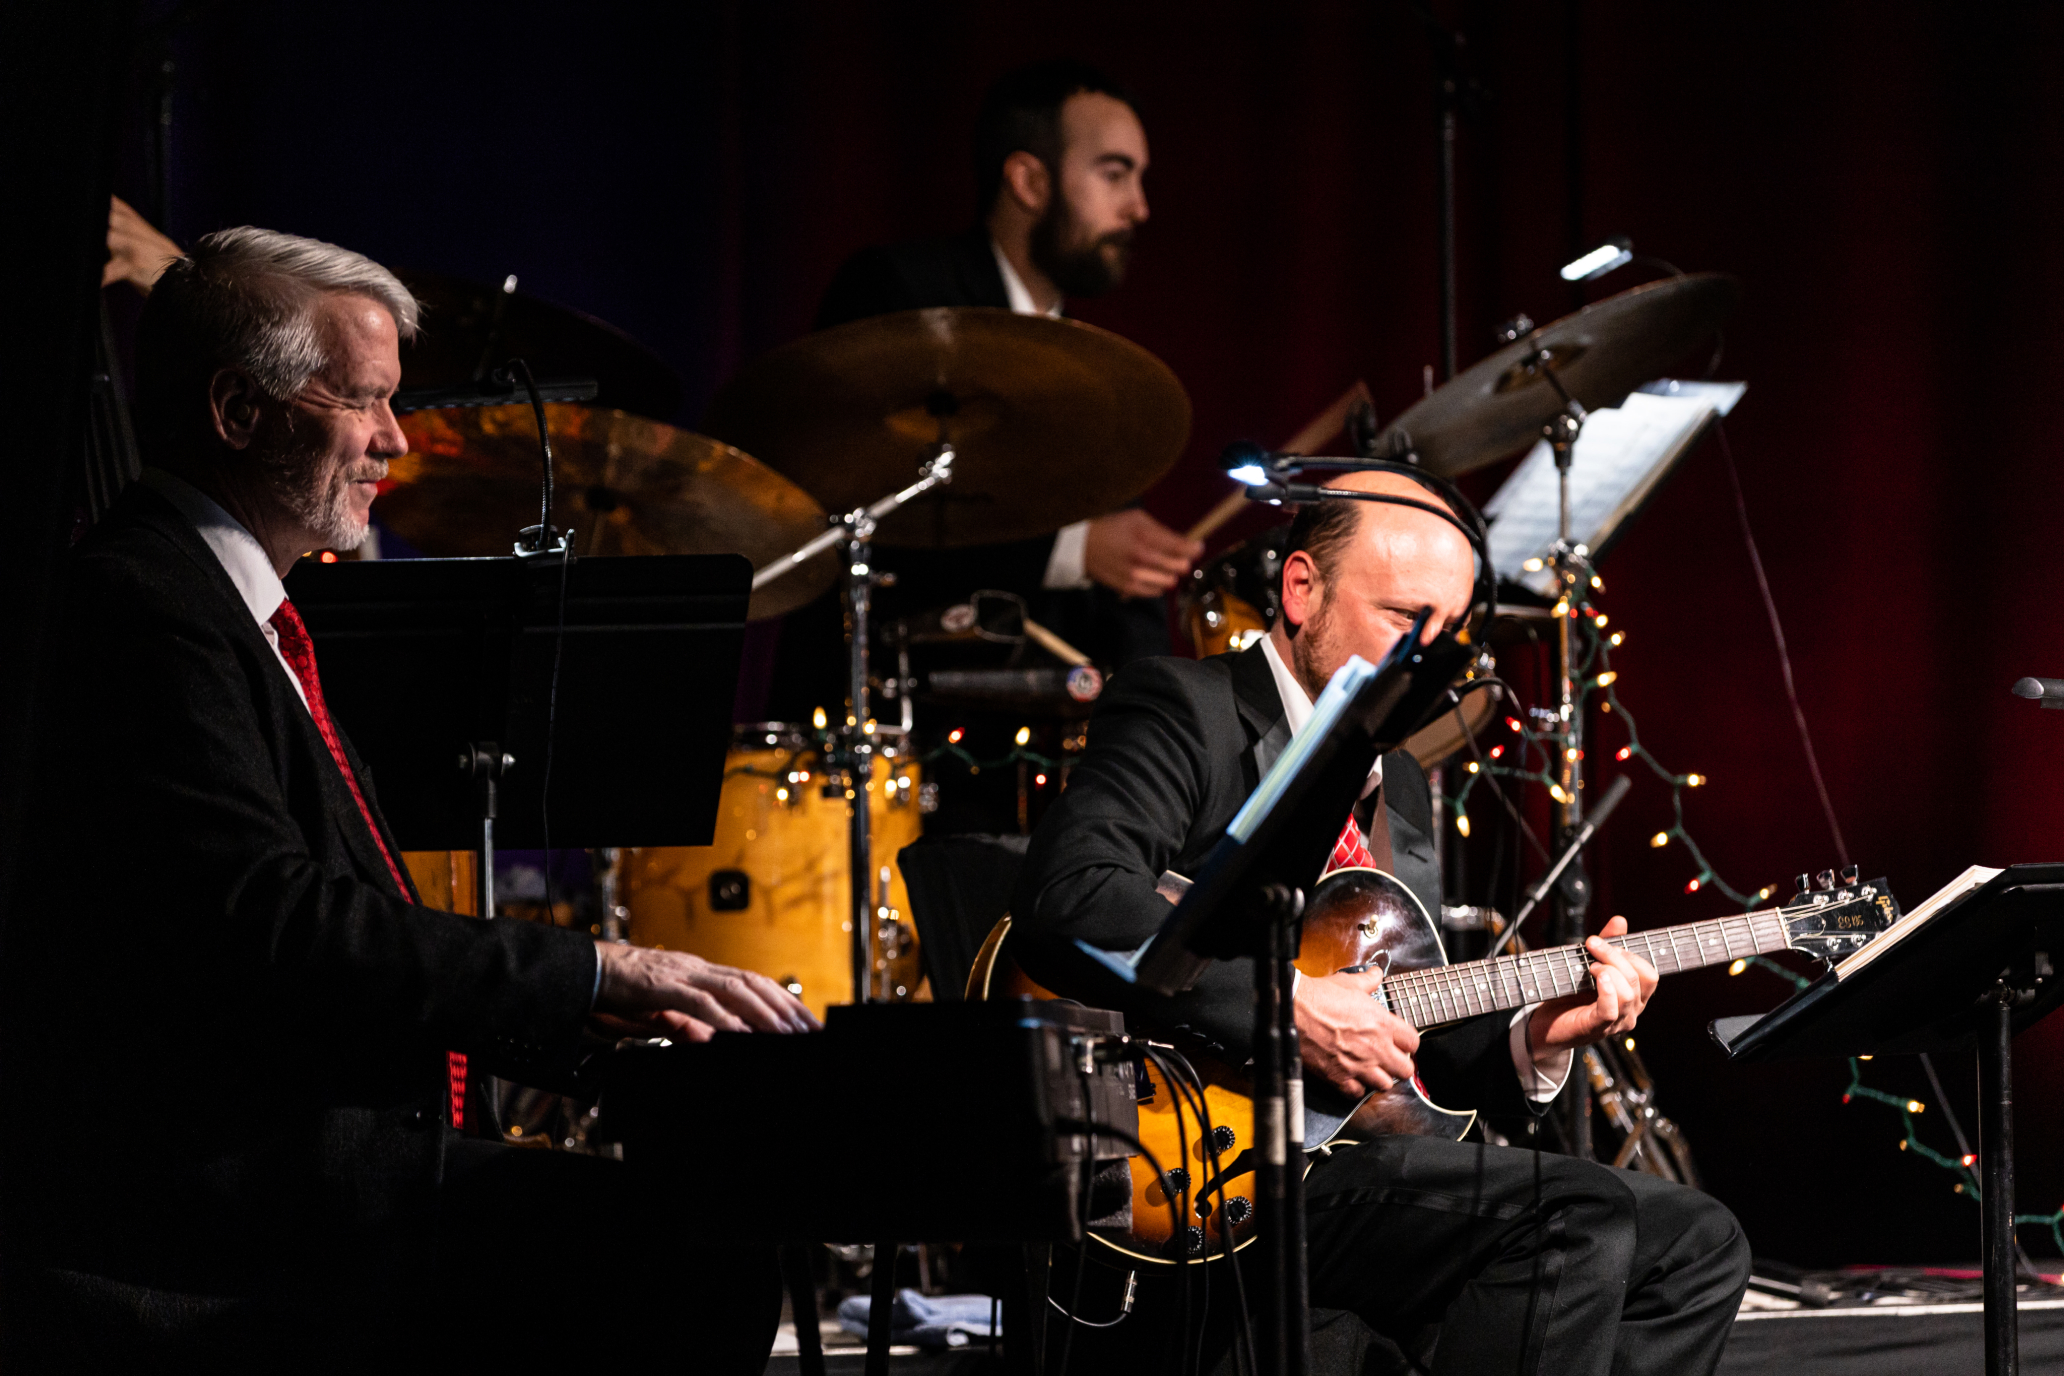 Profile view of three musicians playing seated on stage, a pianist in the foreground, a guitarist, and a drummer in the background.